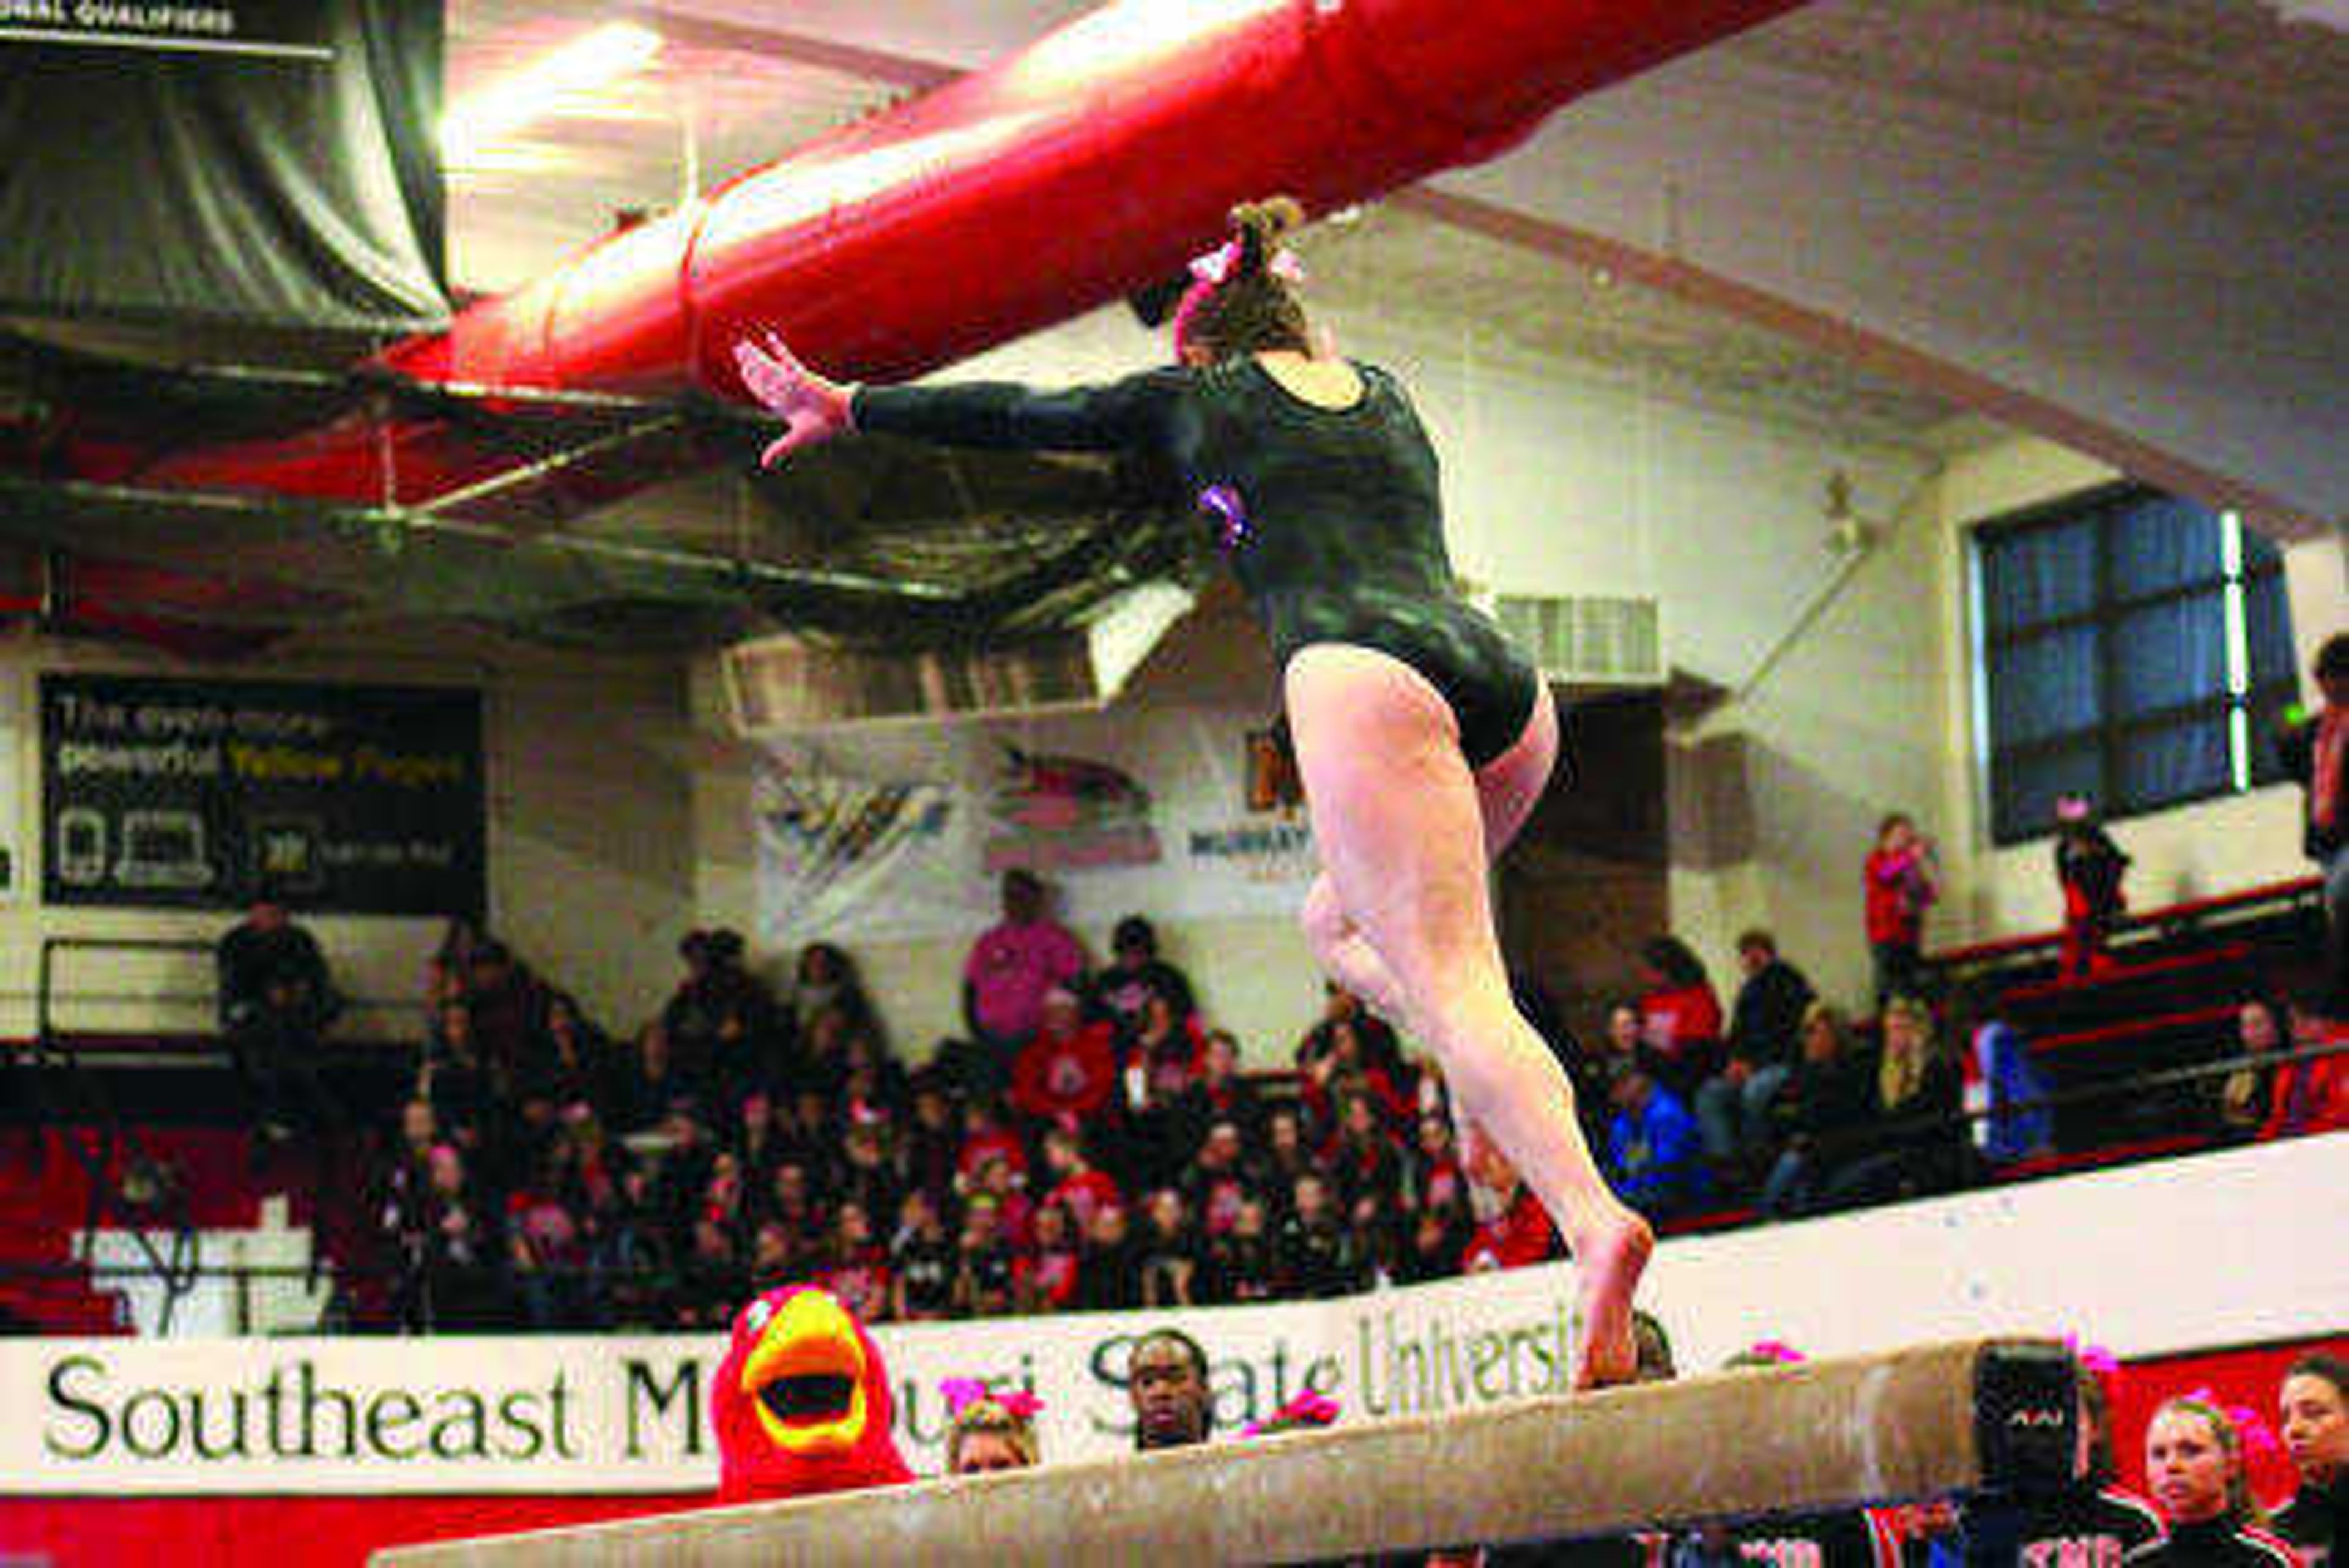 Redhawks gymnastics team hopes focusing on the "little things" will bring success